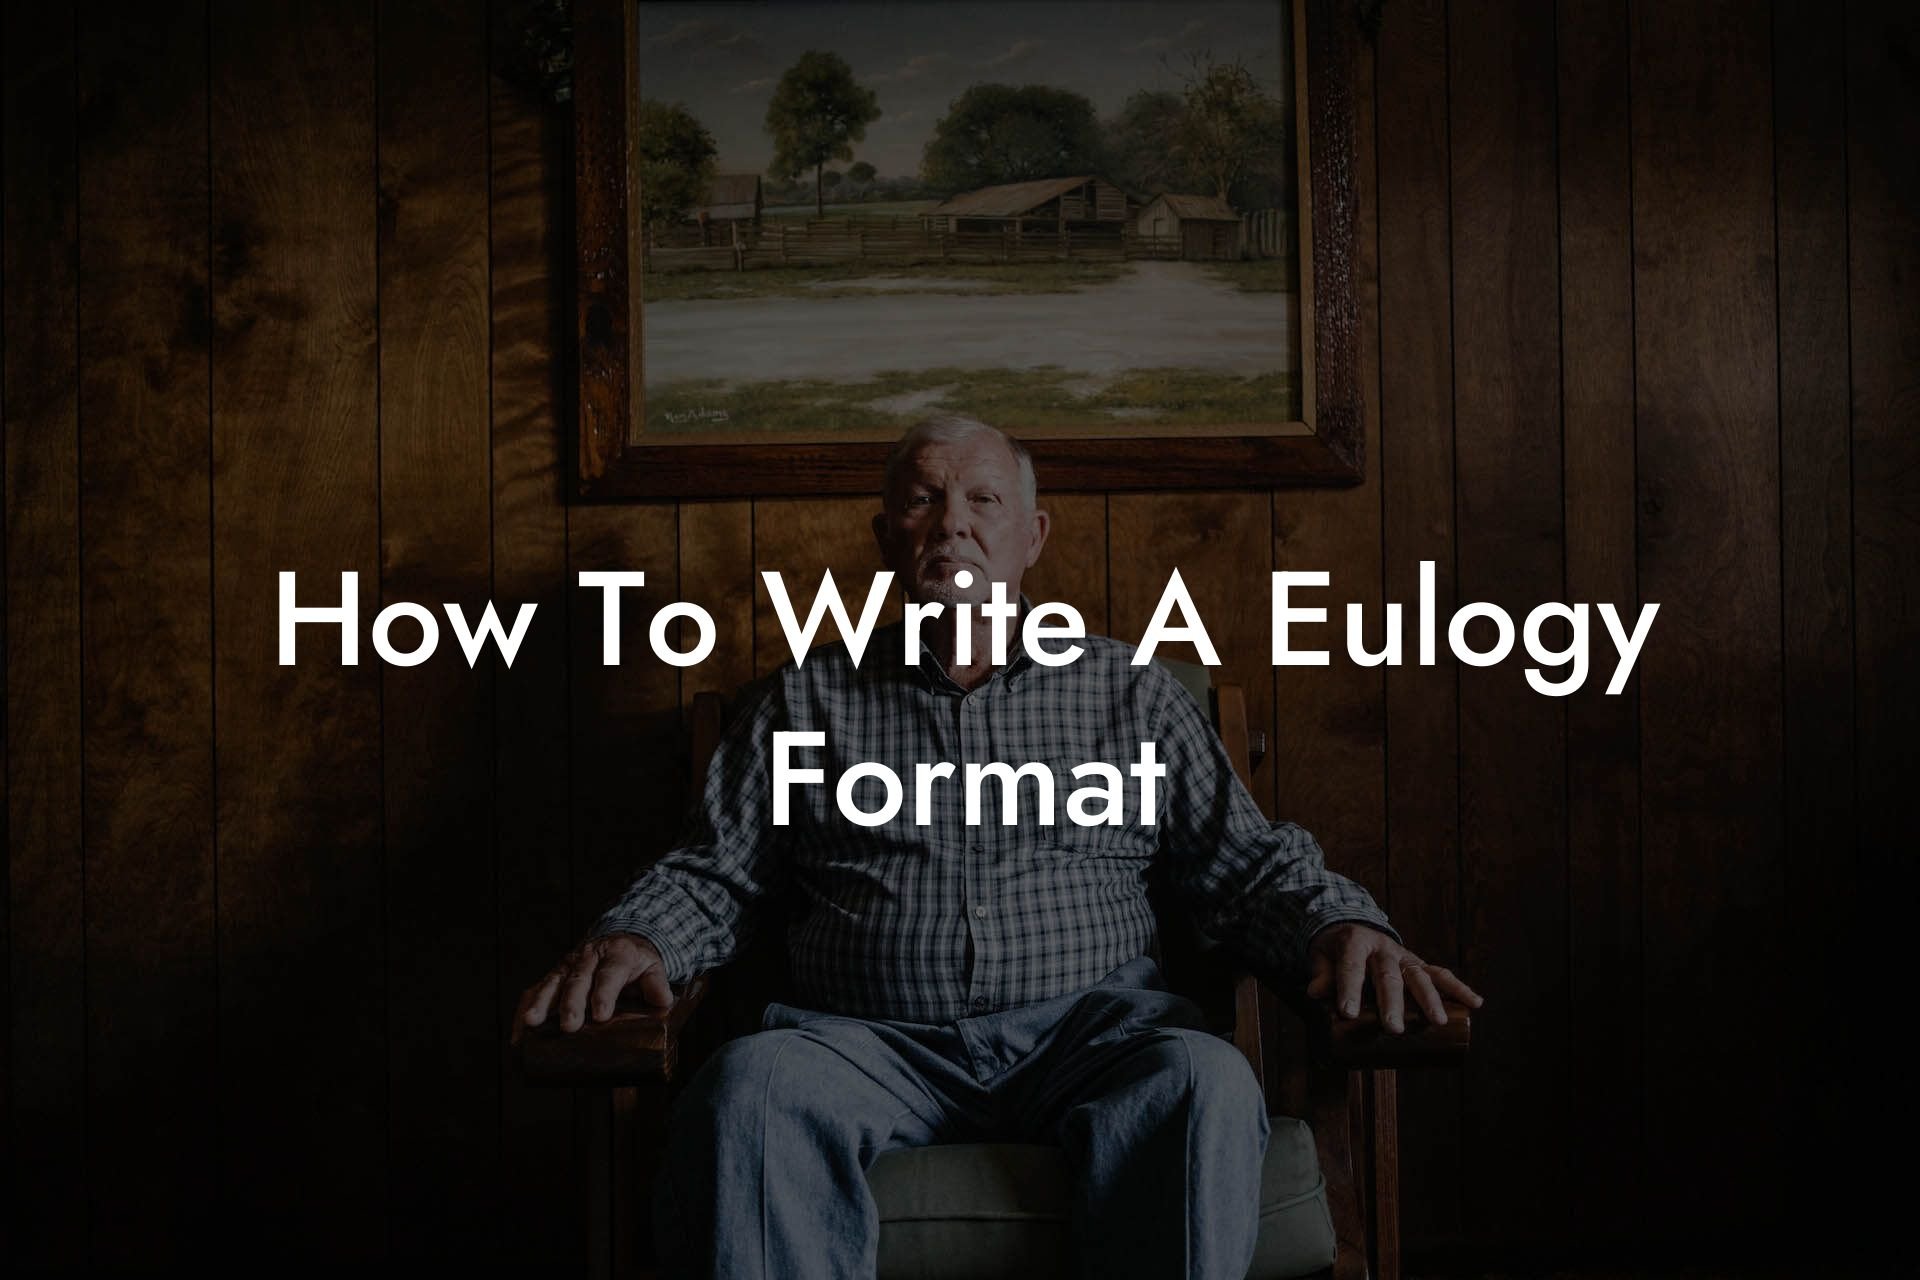 How To Write A Eulogy Format